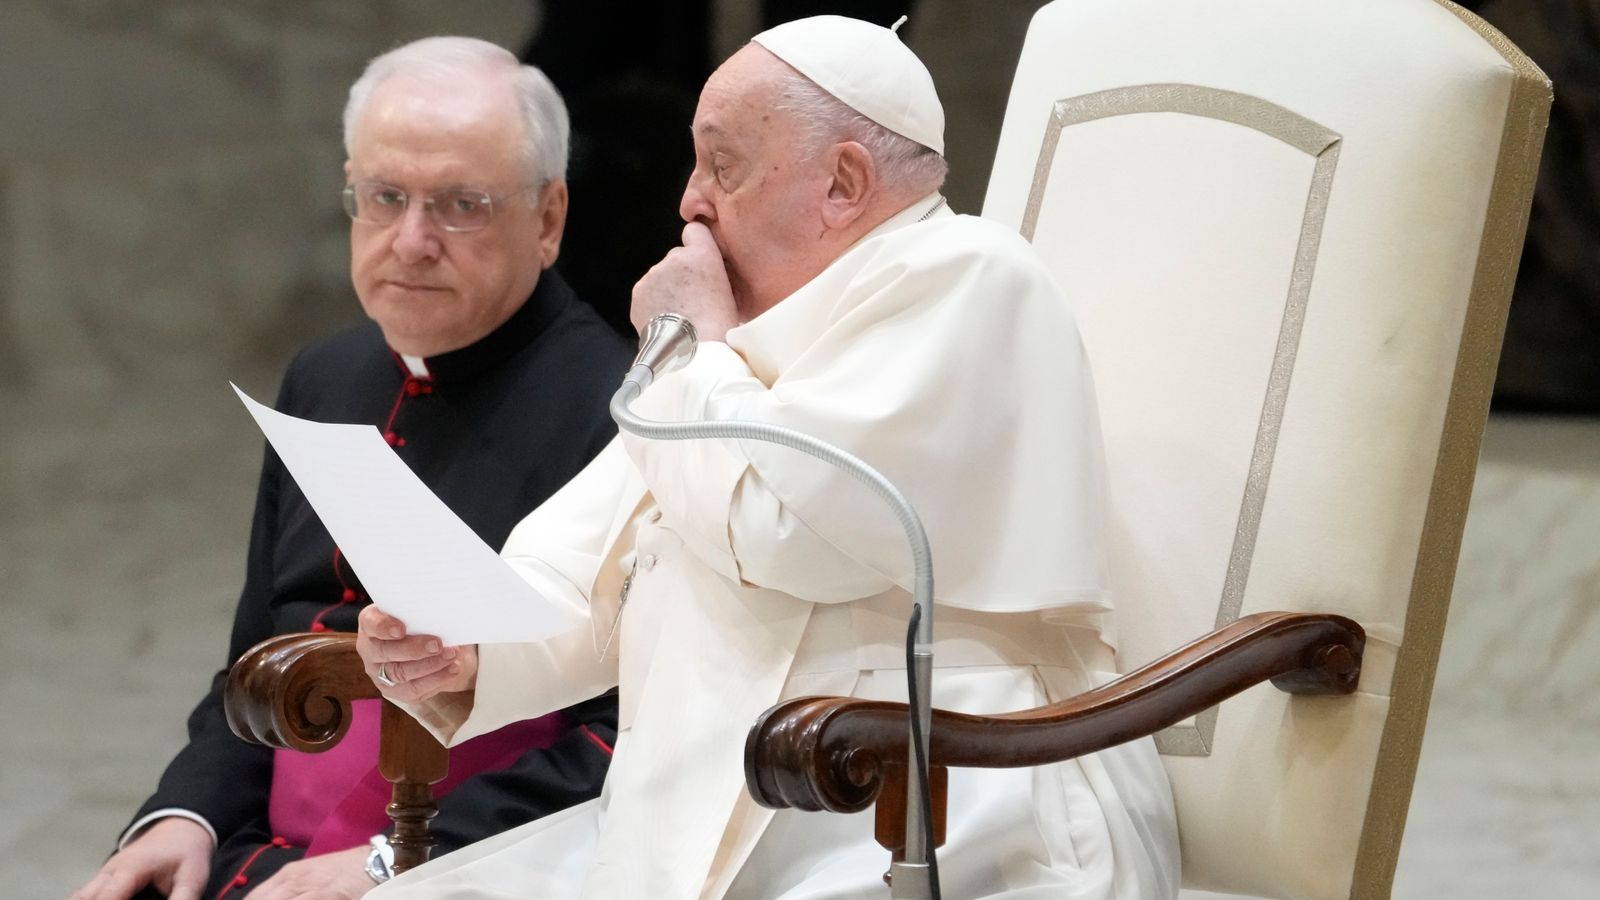 Pope Francis 'not well' as he struggles to read speech at The Vatican